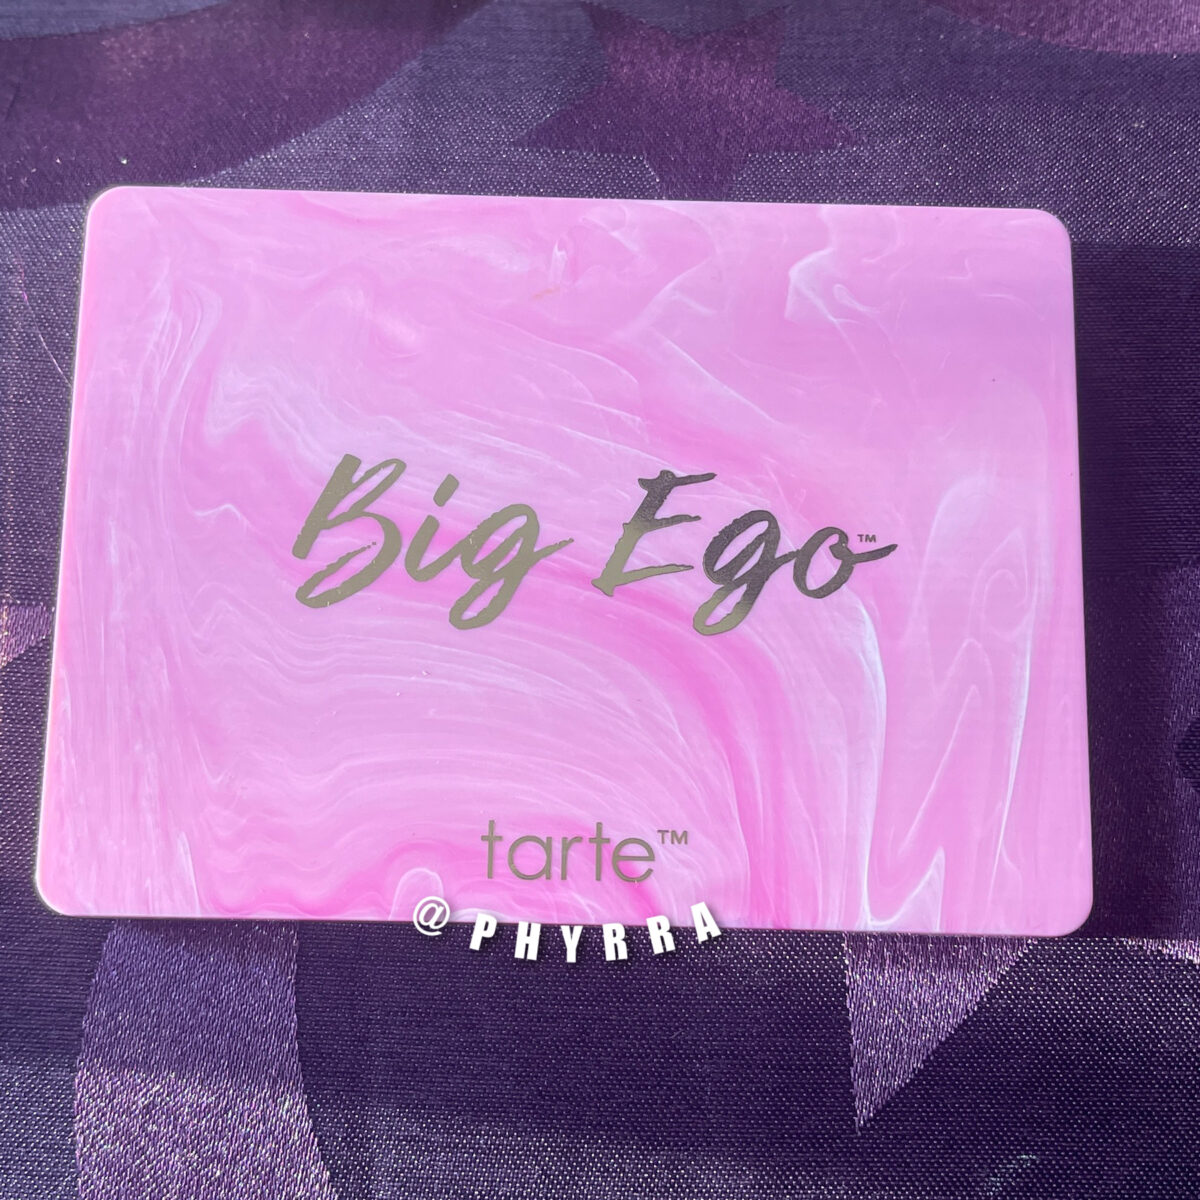 Tarte Big Ego to Go Palette - pink and white swirled cover with gold lettering